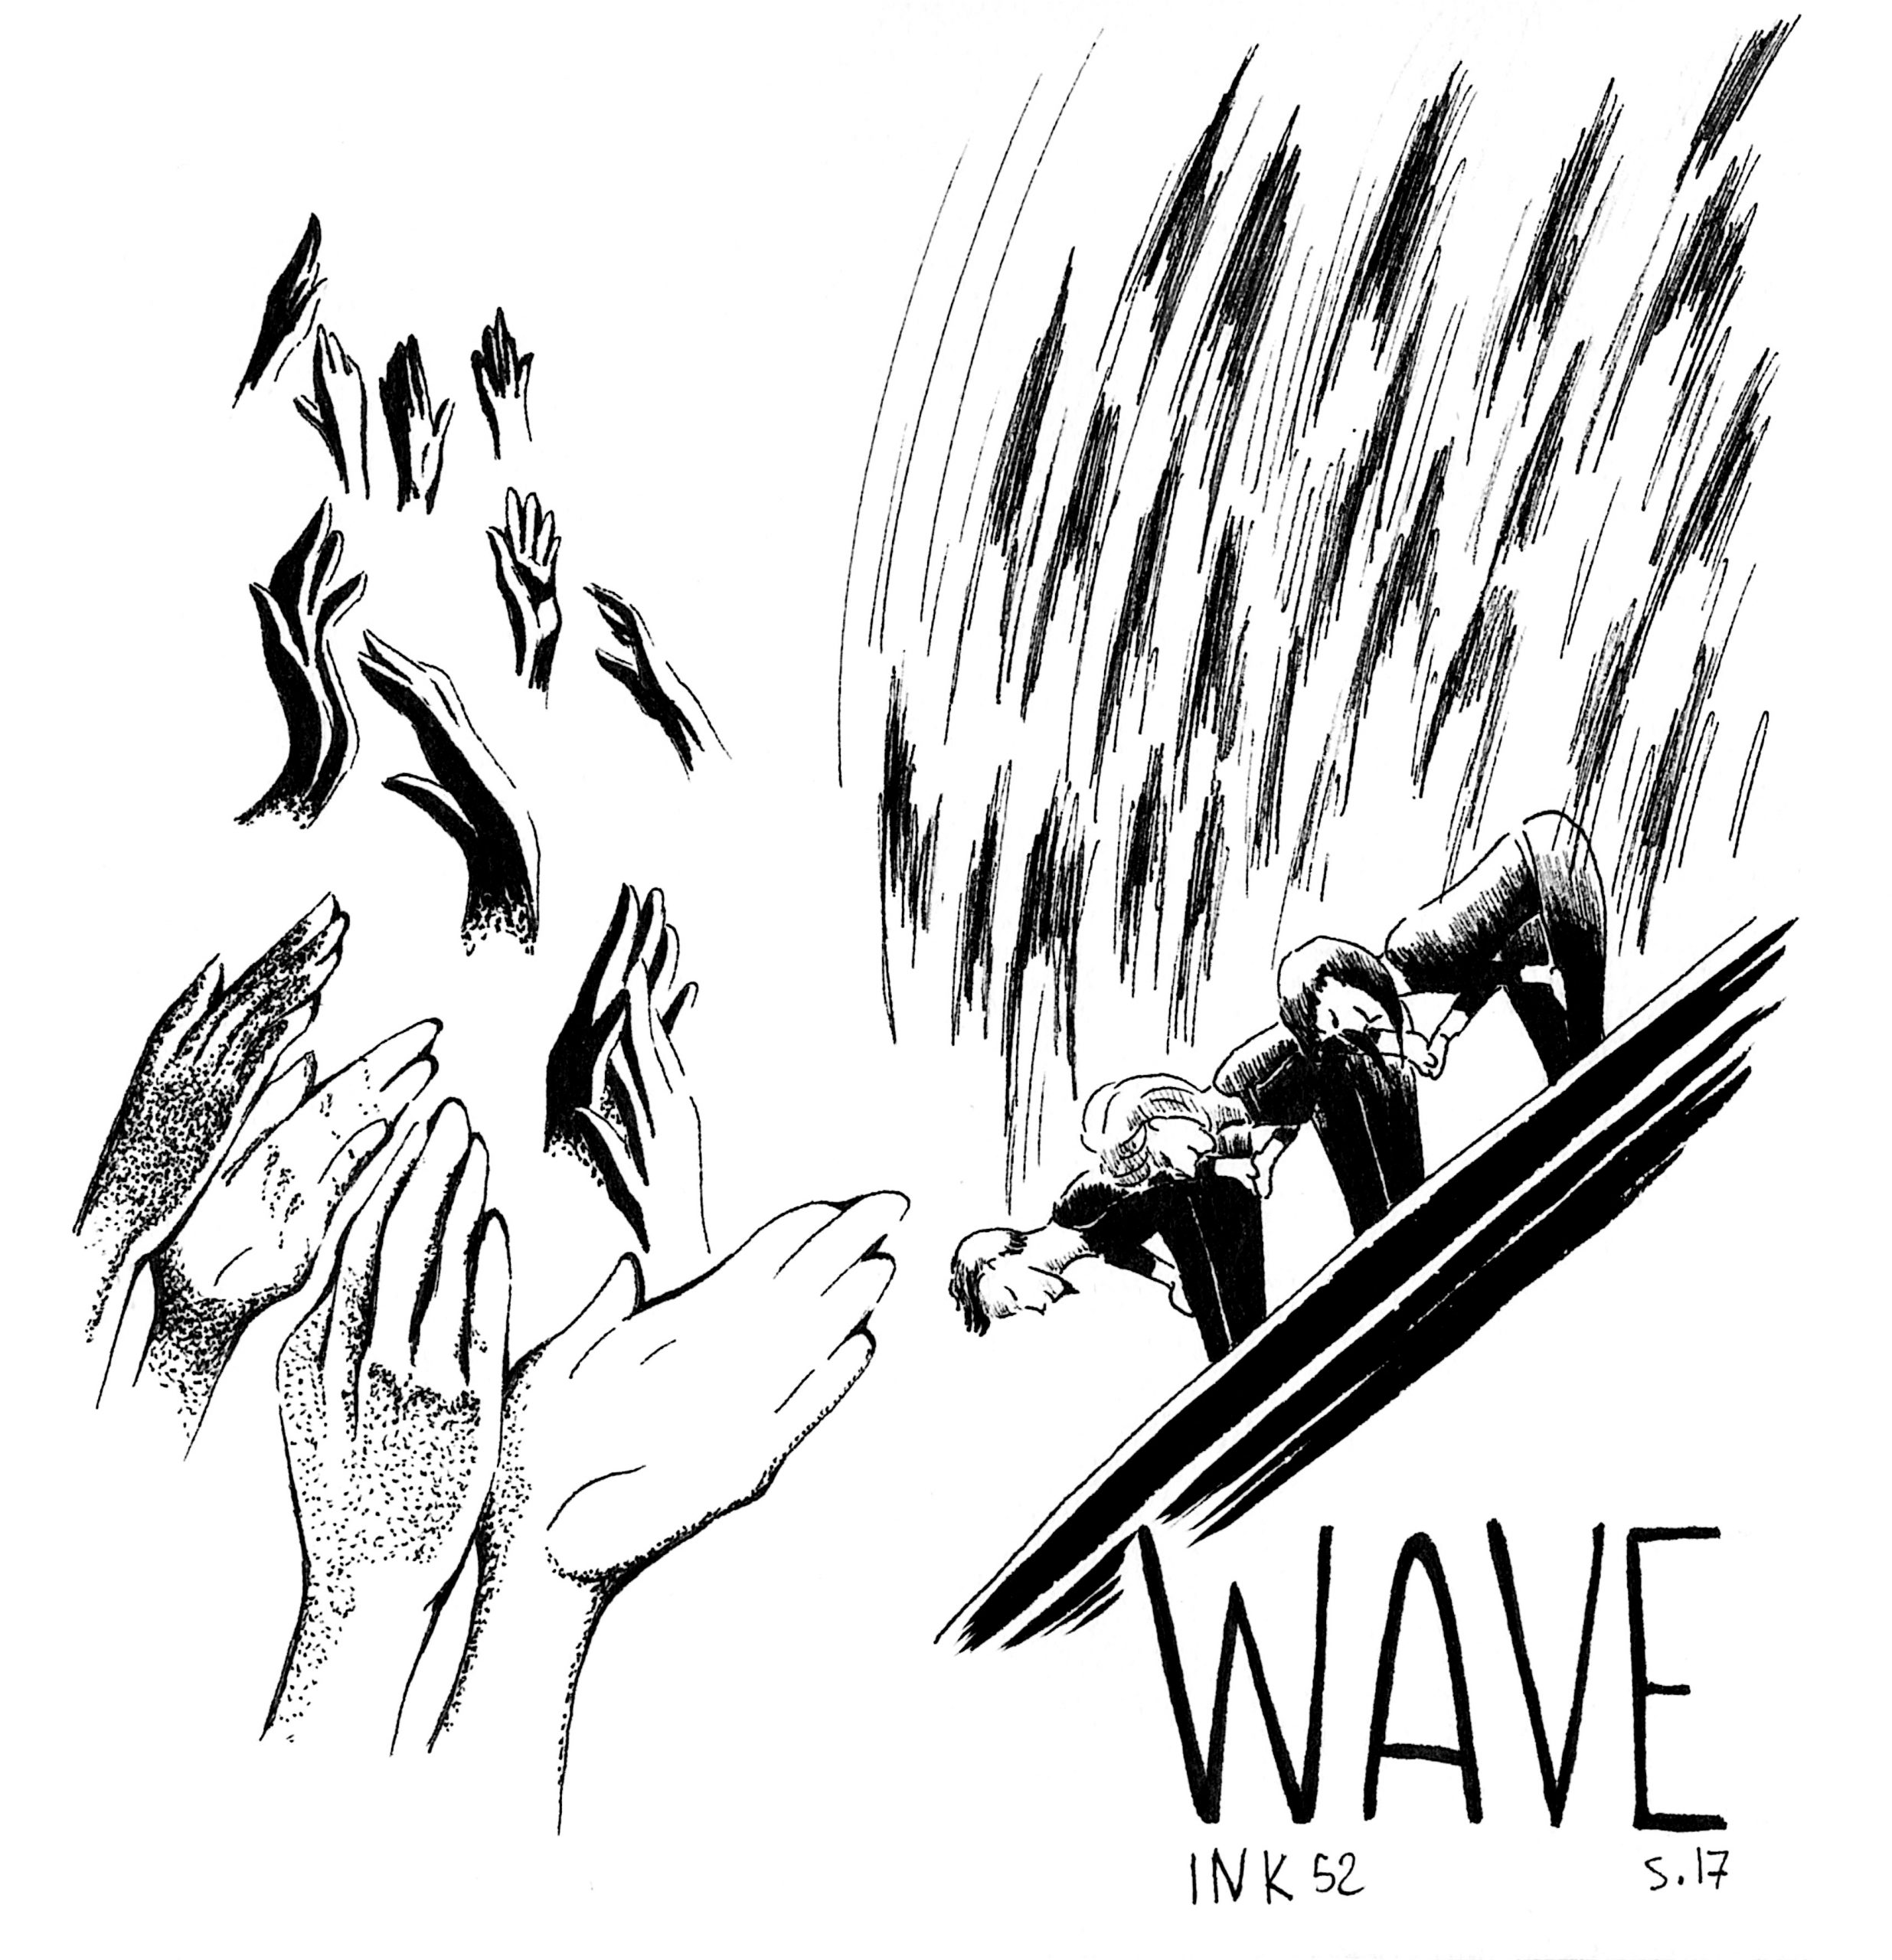 S.17 WAVE